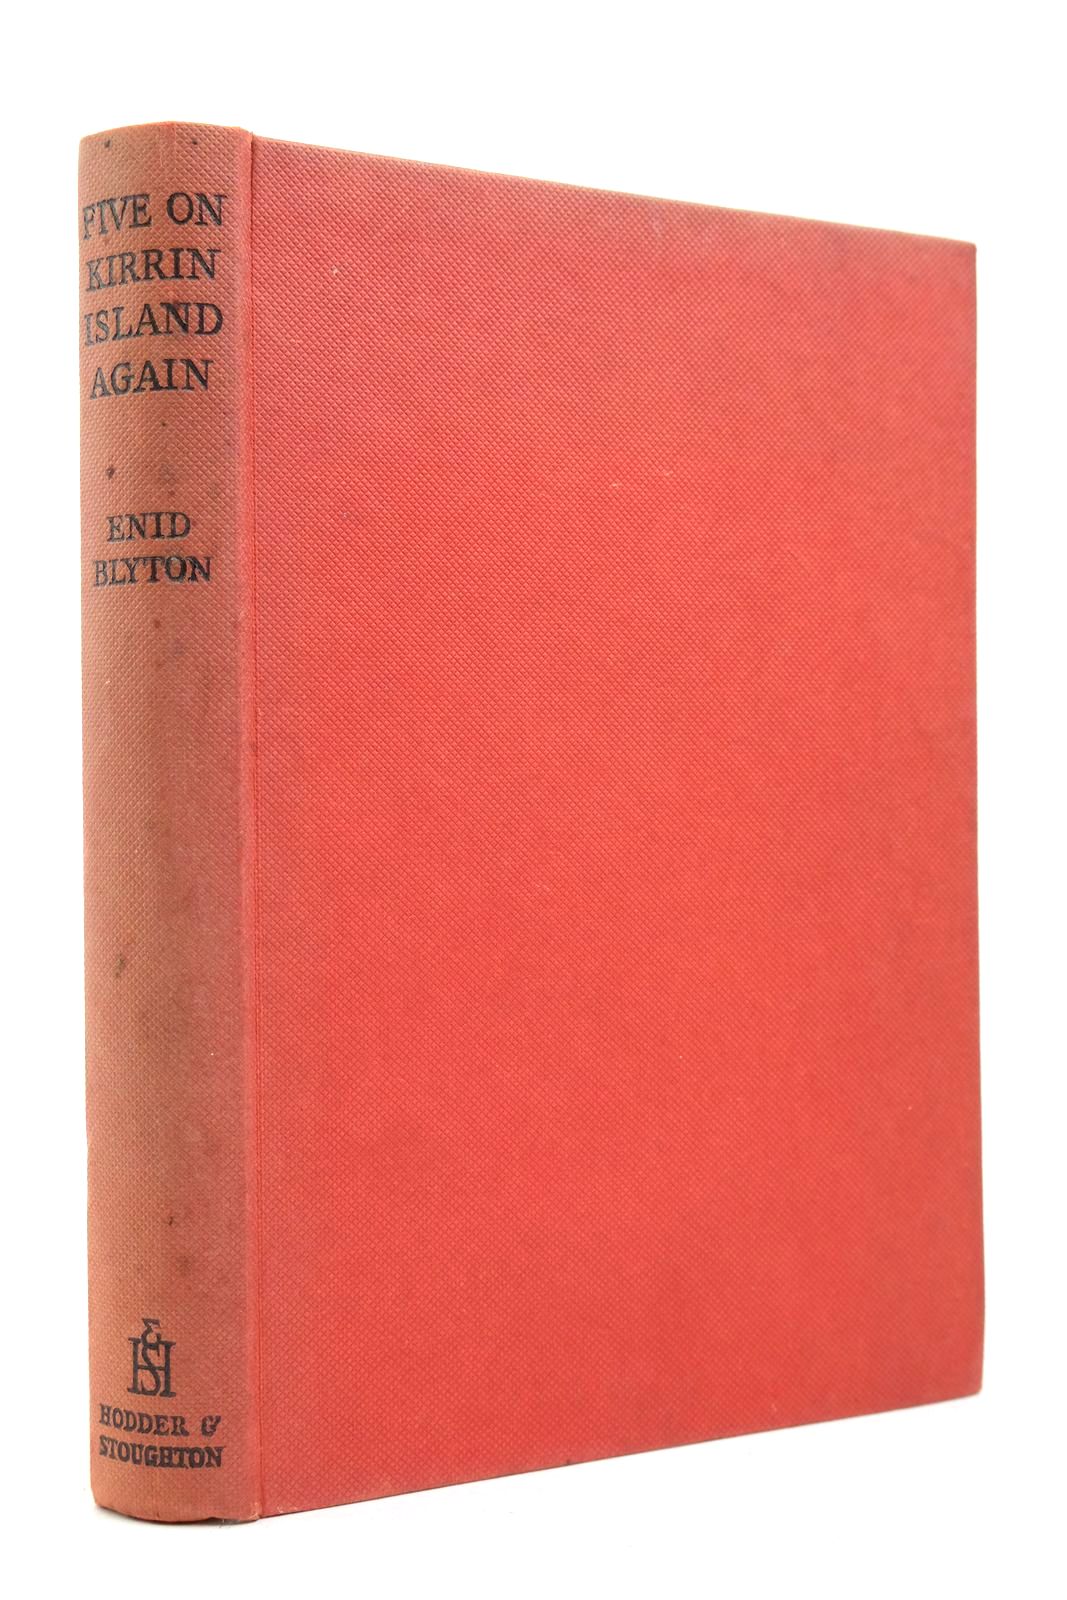 Photo of FIVE ON KIRRIN ISLAND AGAIN written by Blyton, Enid illustrated by Soper, Eileen published by Hodder & Stoughton (STOCK CODE: 2140490)  for sale by Stella & Rose's Books